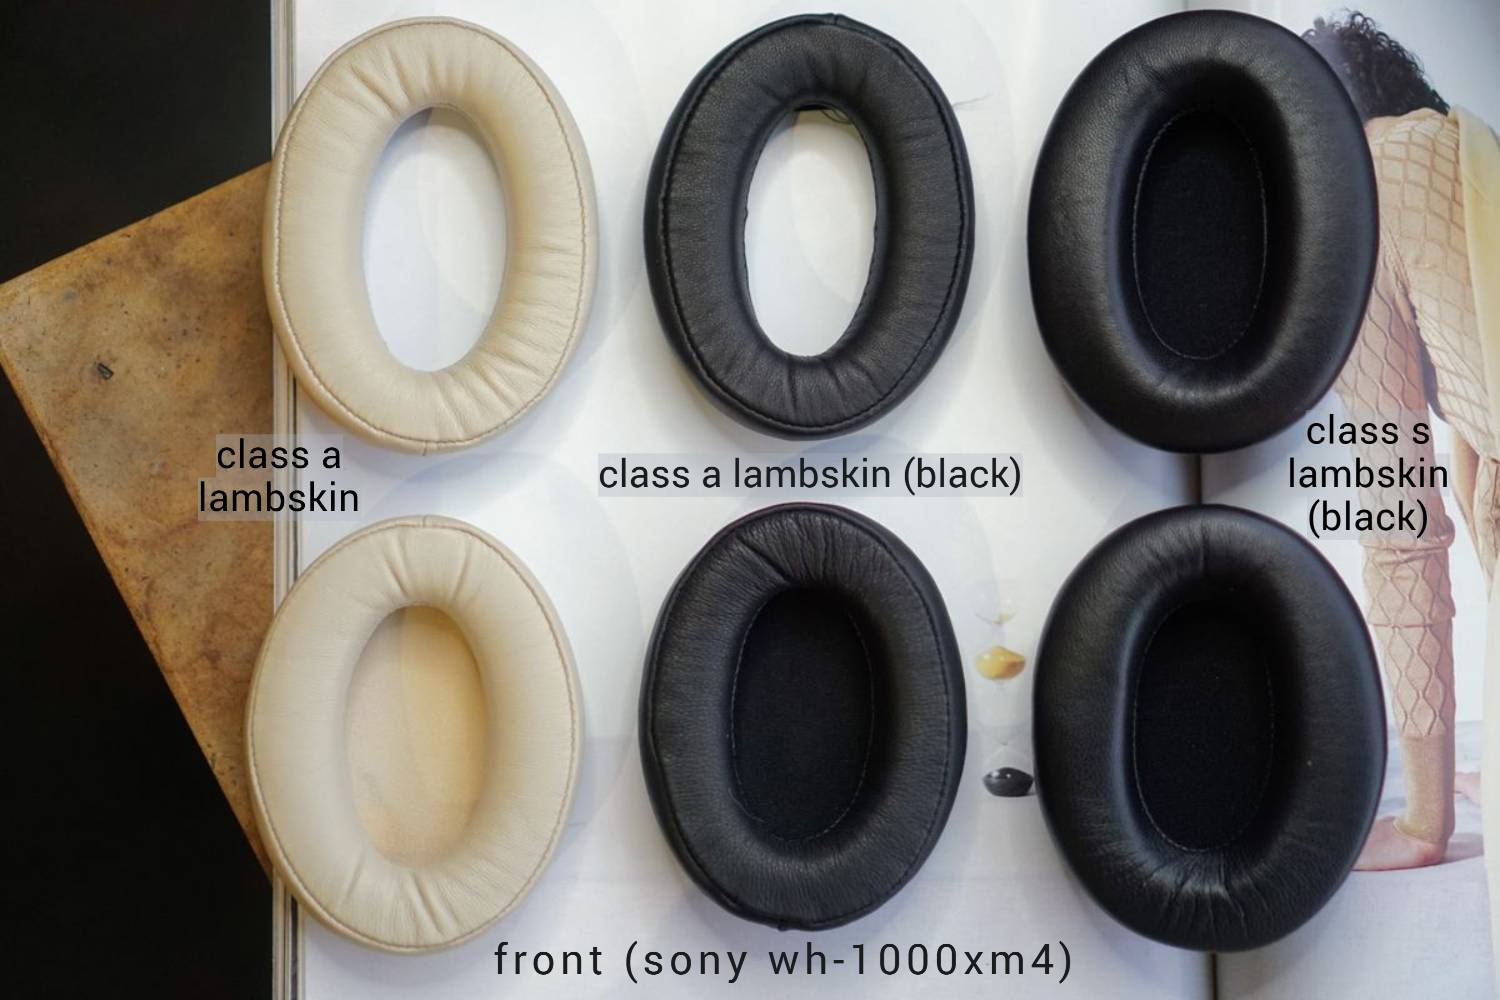 (Class S / A Lambskin) Sony WH-1000XM4 WH1000XM4 Lambskin 3rd party Aftermarket Replacement Earpad